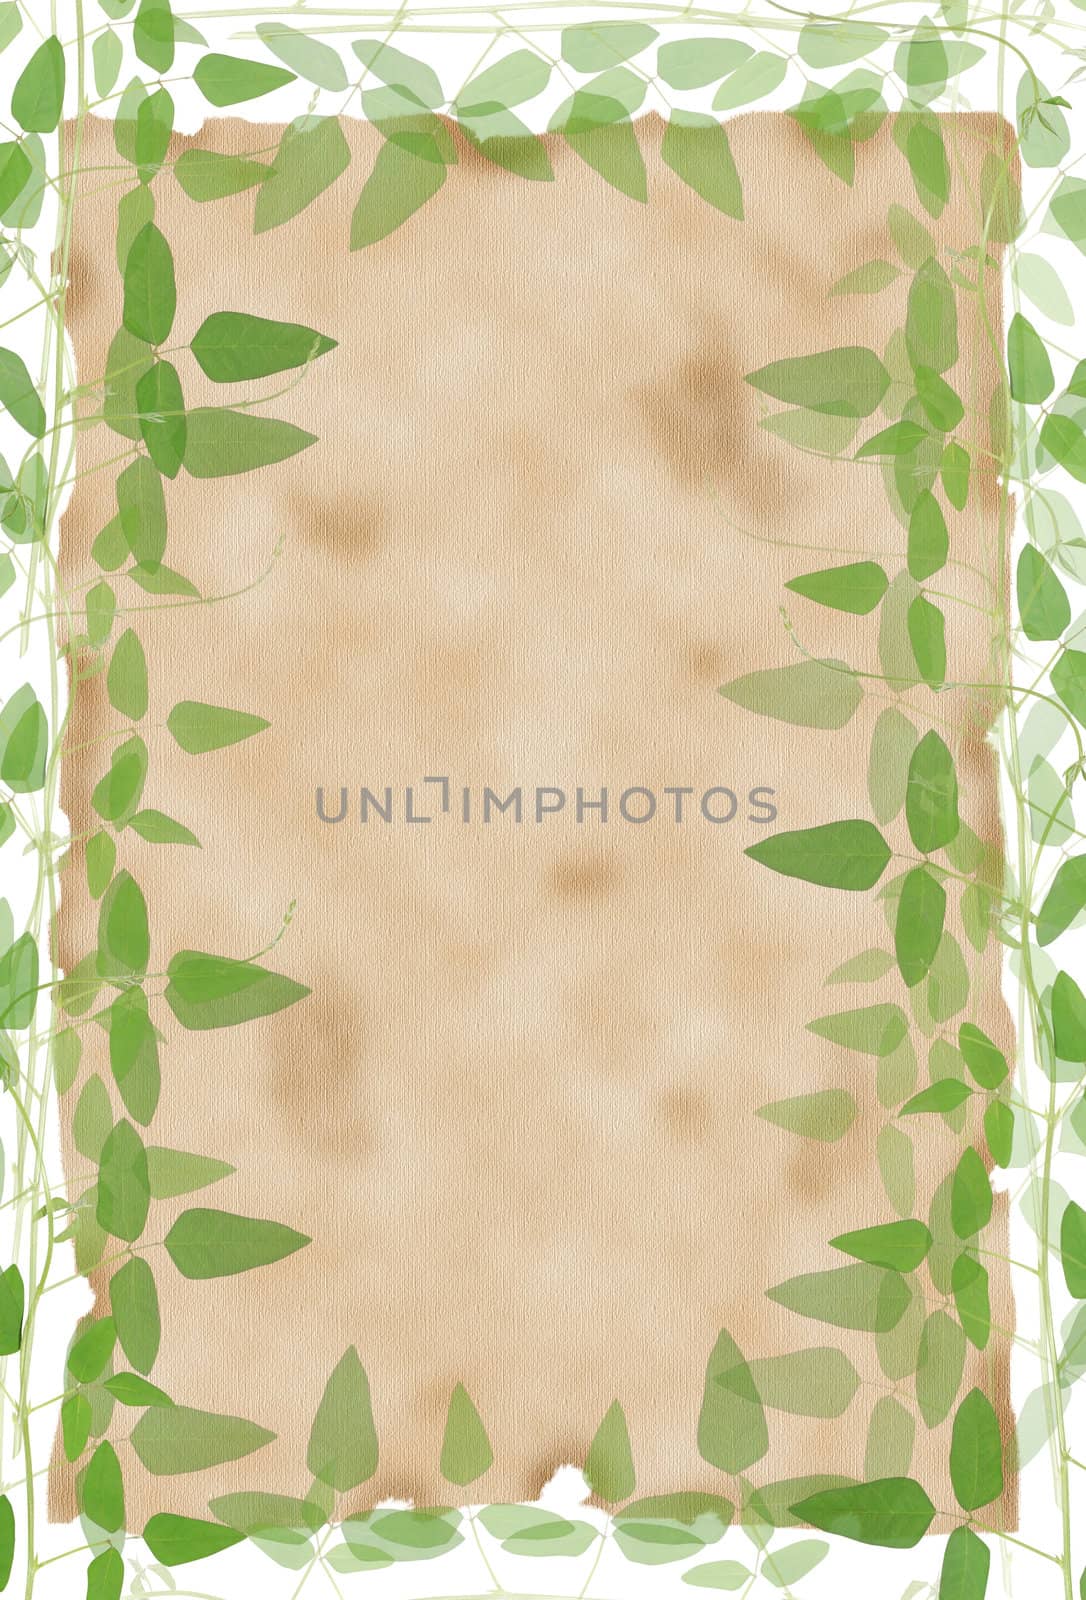 Lined paper framed by natural green leaves background